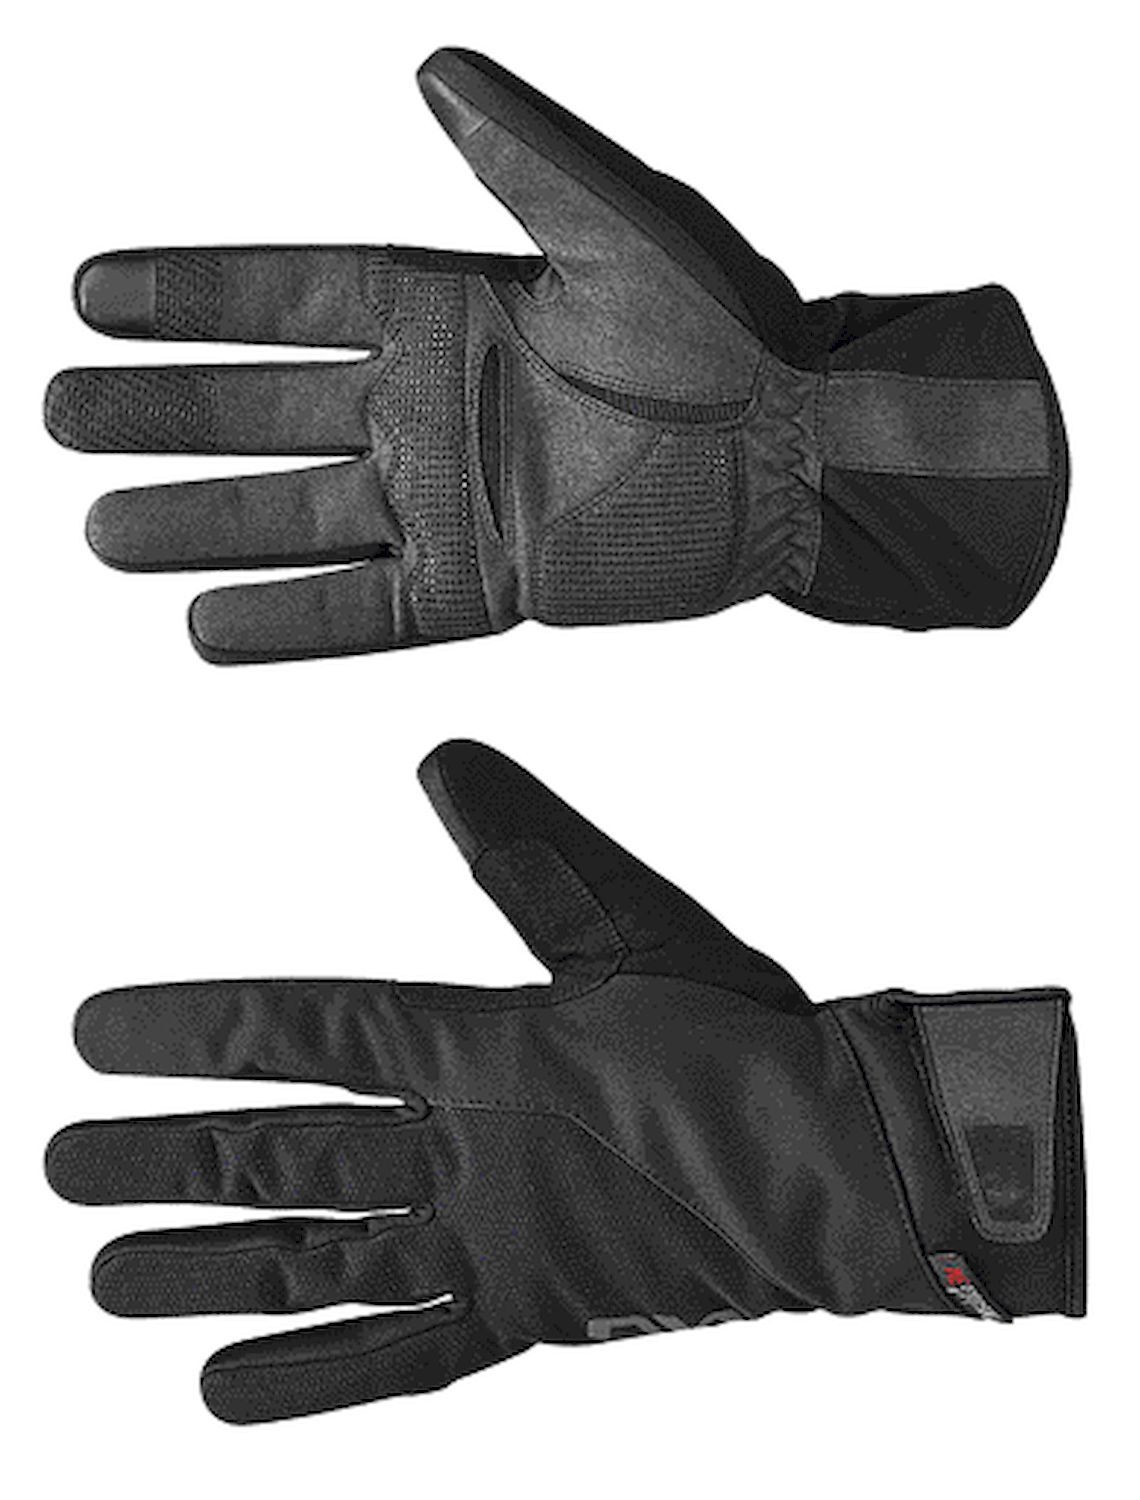 Northwave Fast Arctic Glove - Guantes ciclismo - Hombre